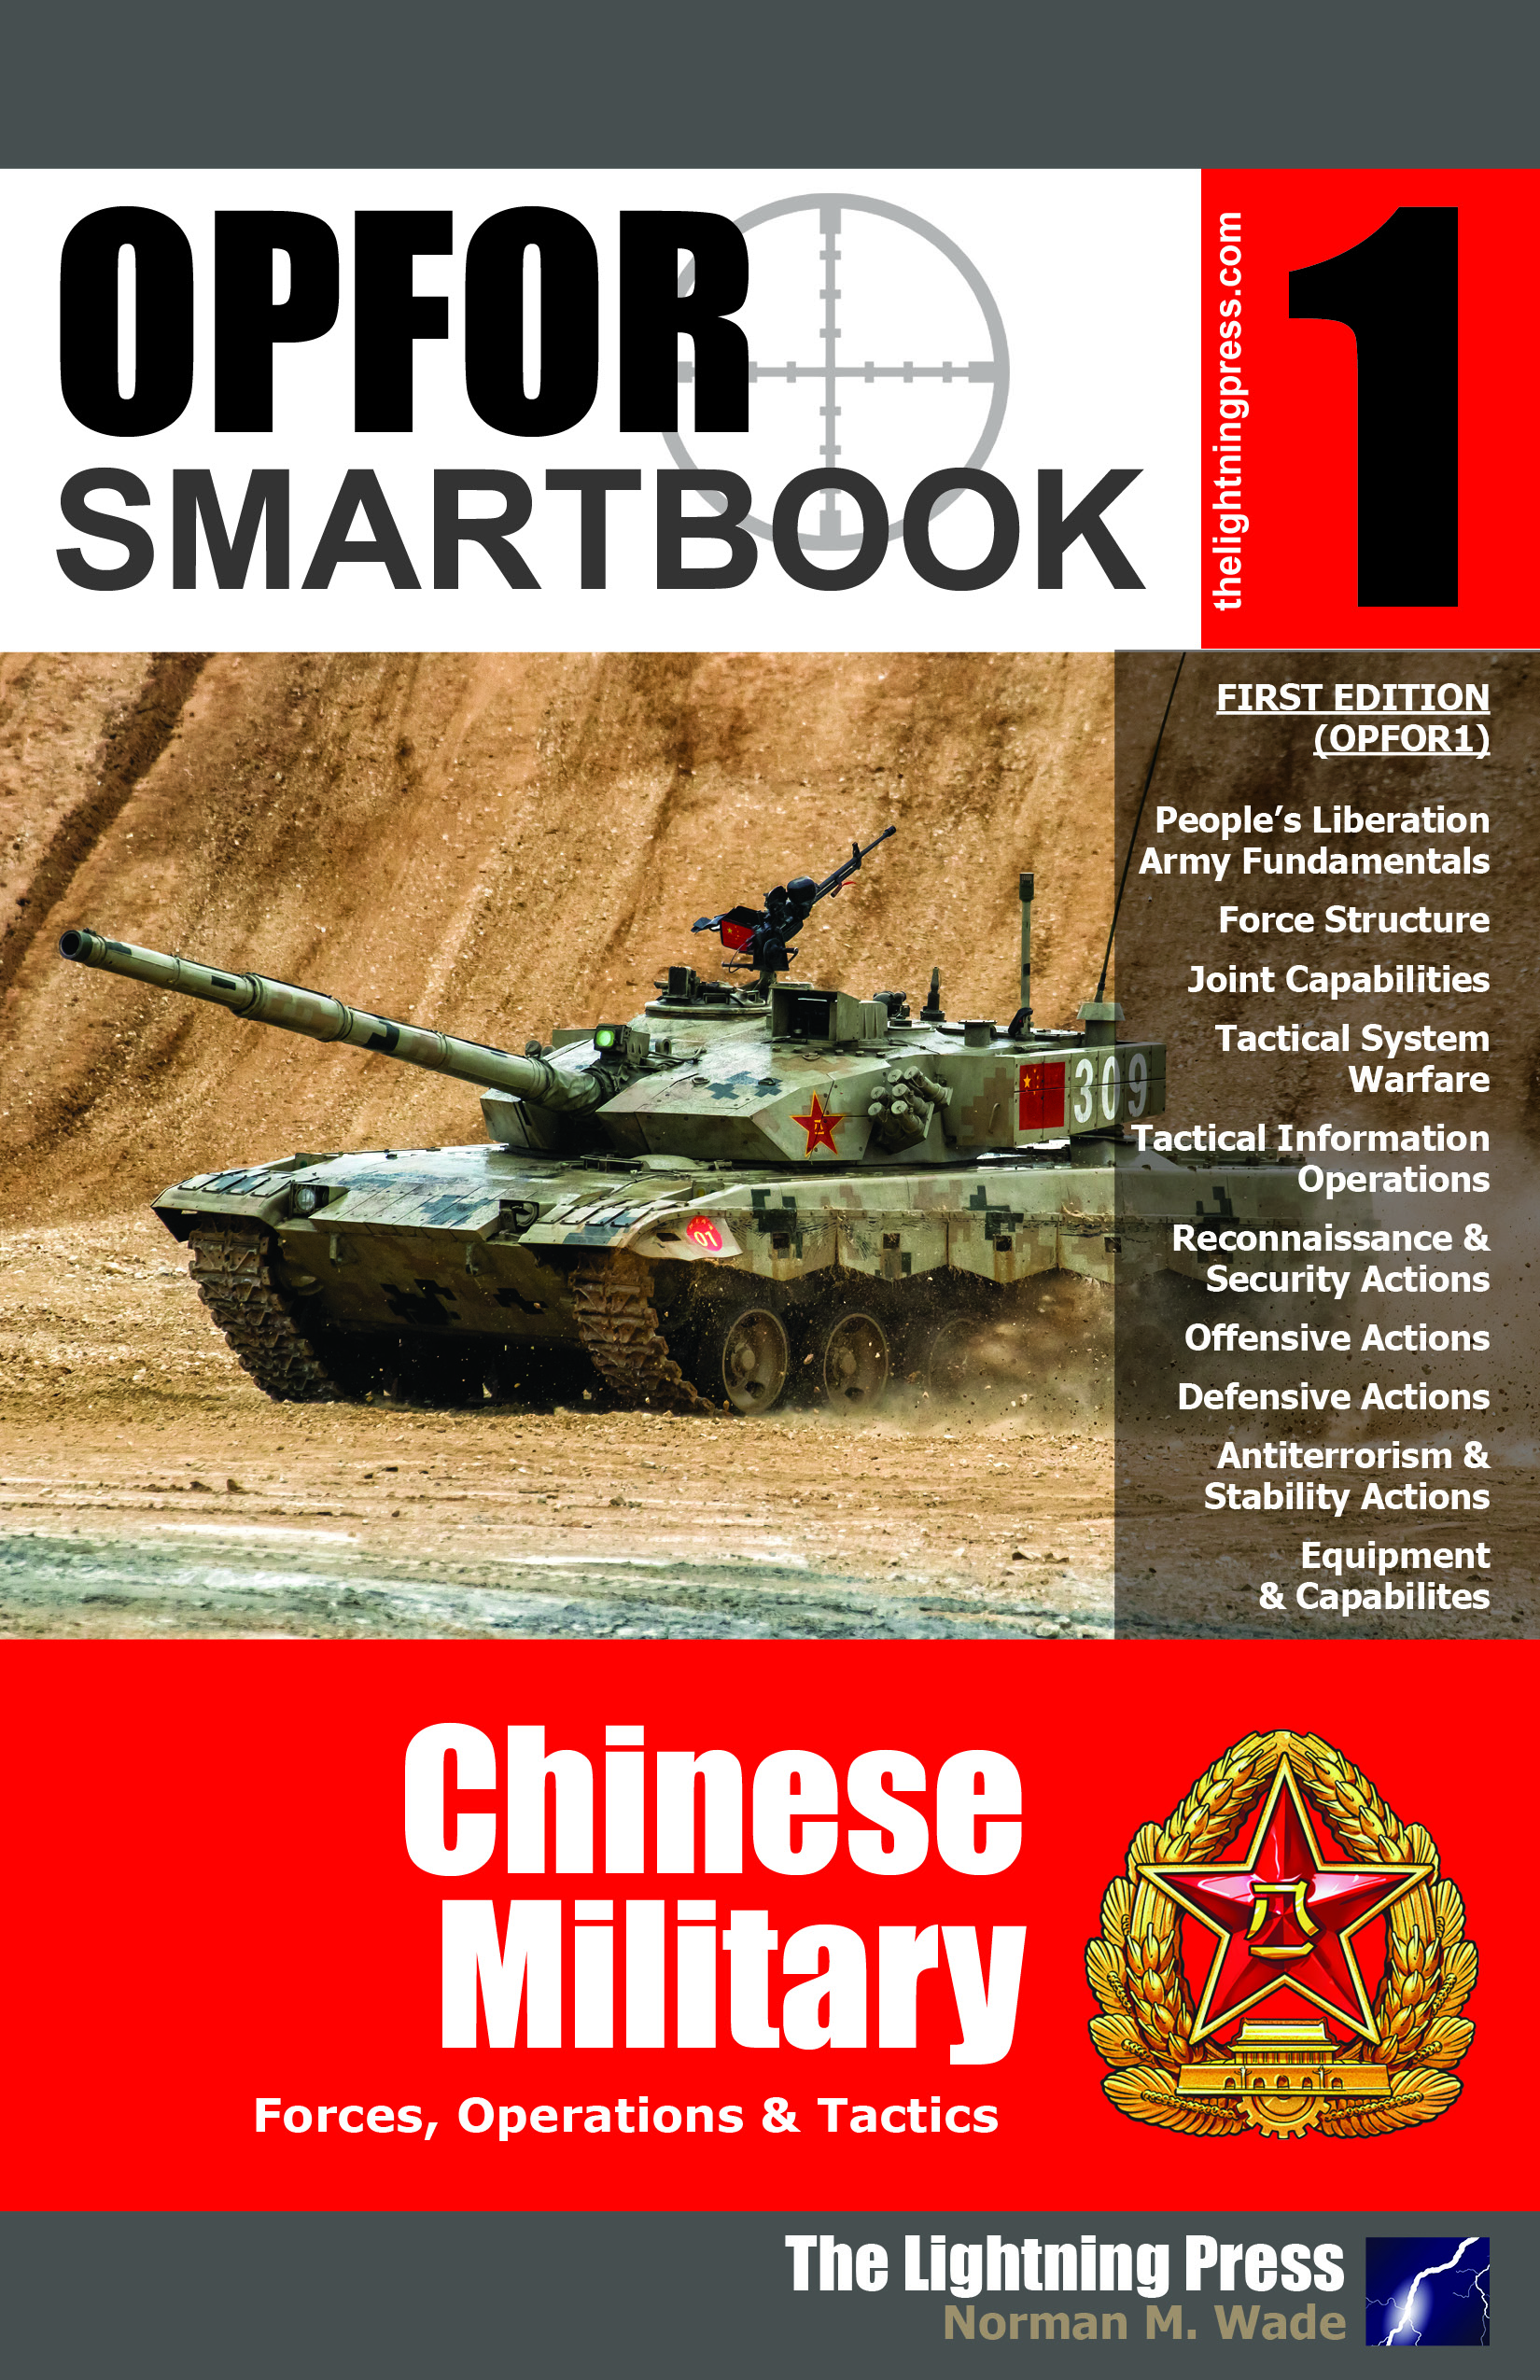 OPFOR SMARTbook 1 - Chinese Military